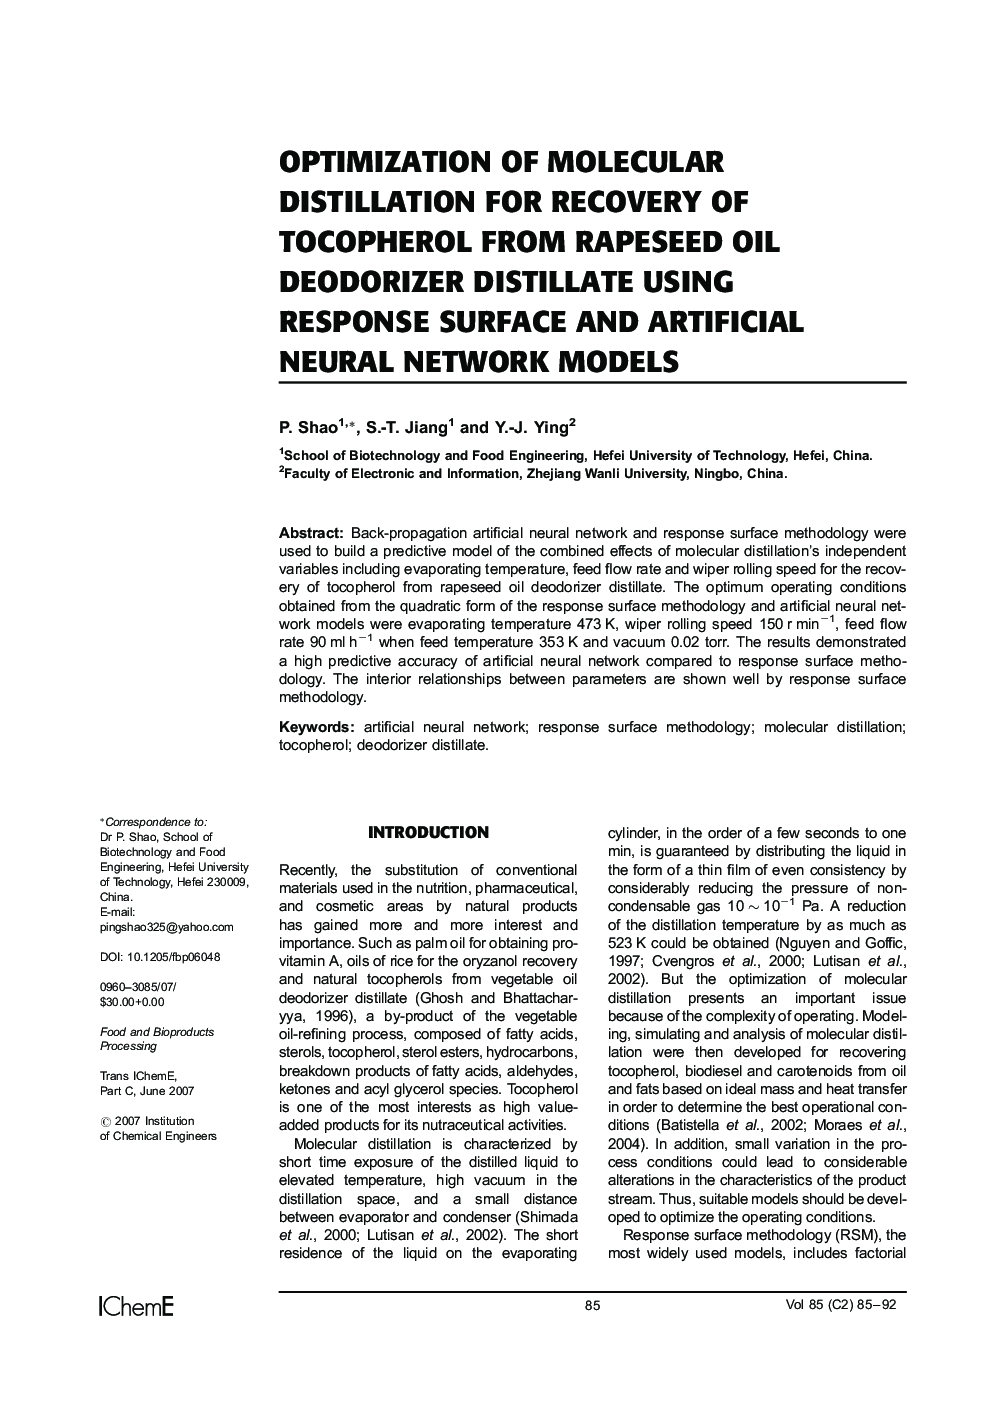 Optimization of Molecular Distillation for Recovery of Tocopherol from Rapeseed Oil Deodorizer Distillate Using Response Surface and Artificial Neural Network Models